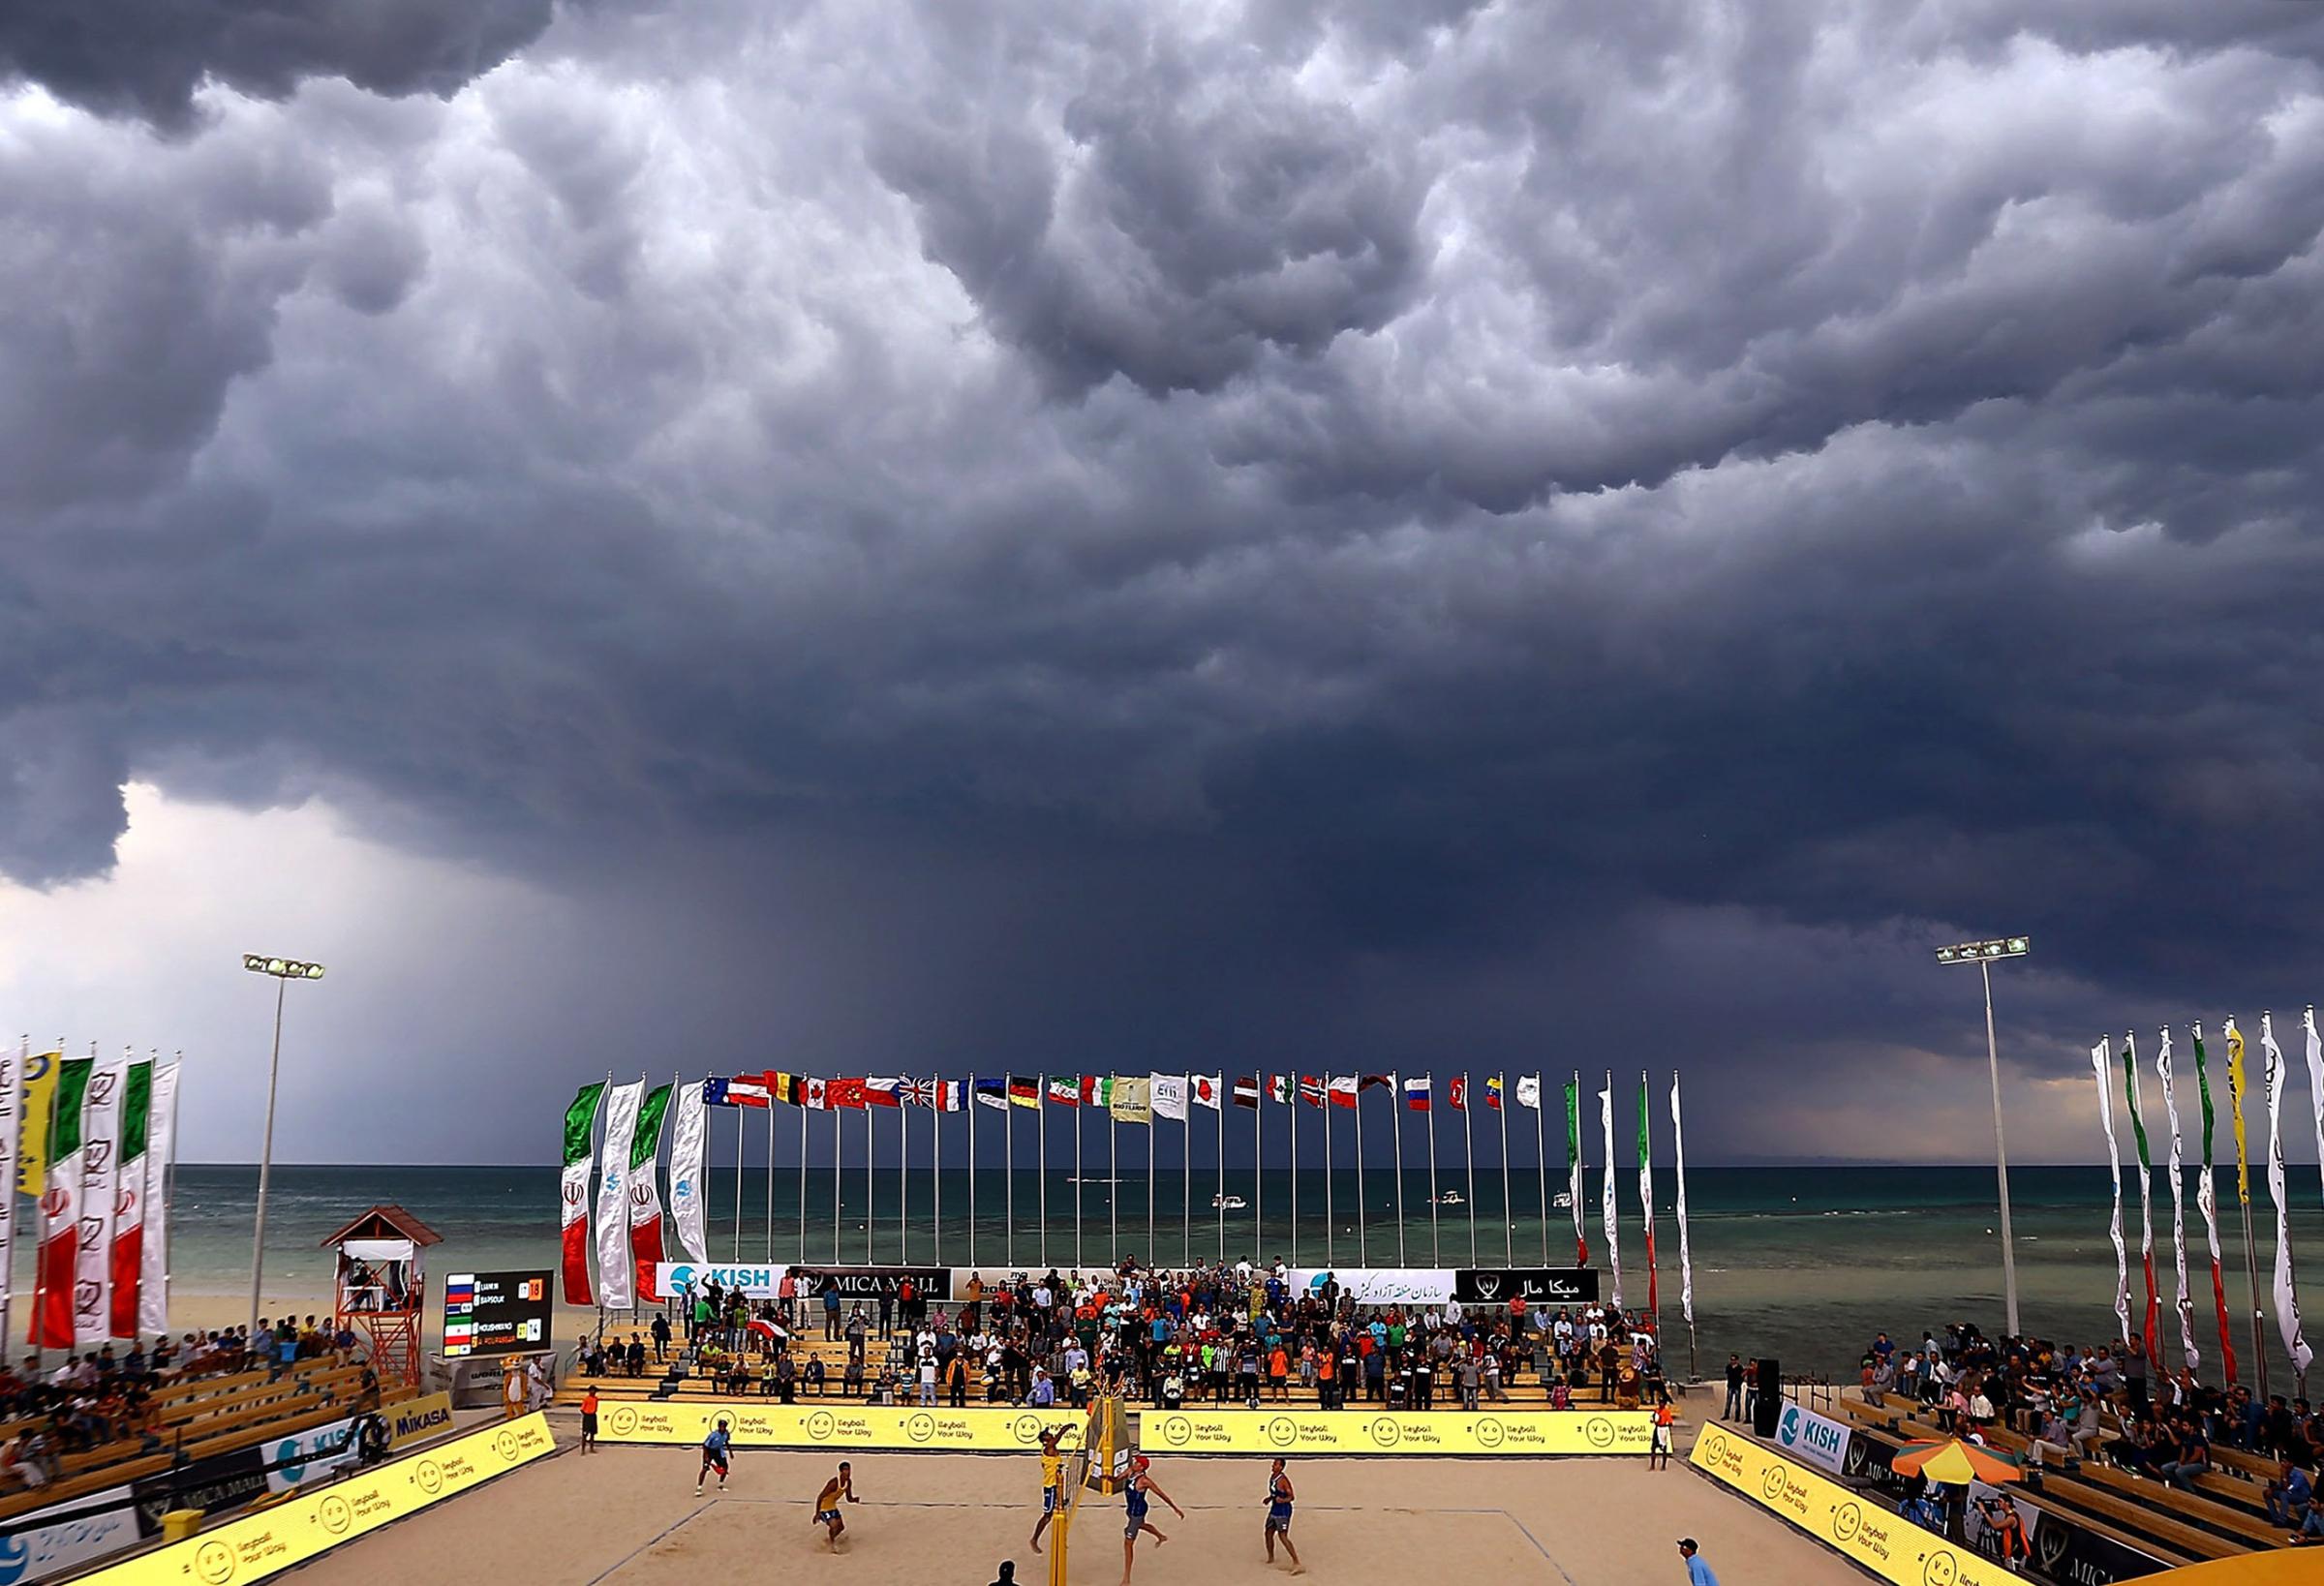 A general view of court action as the weather closes in on day 3 of the FIVB Kish Island in Iran on Feb. 17, 2016.